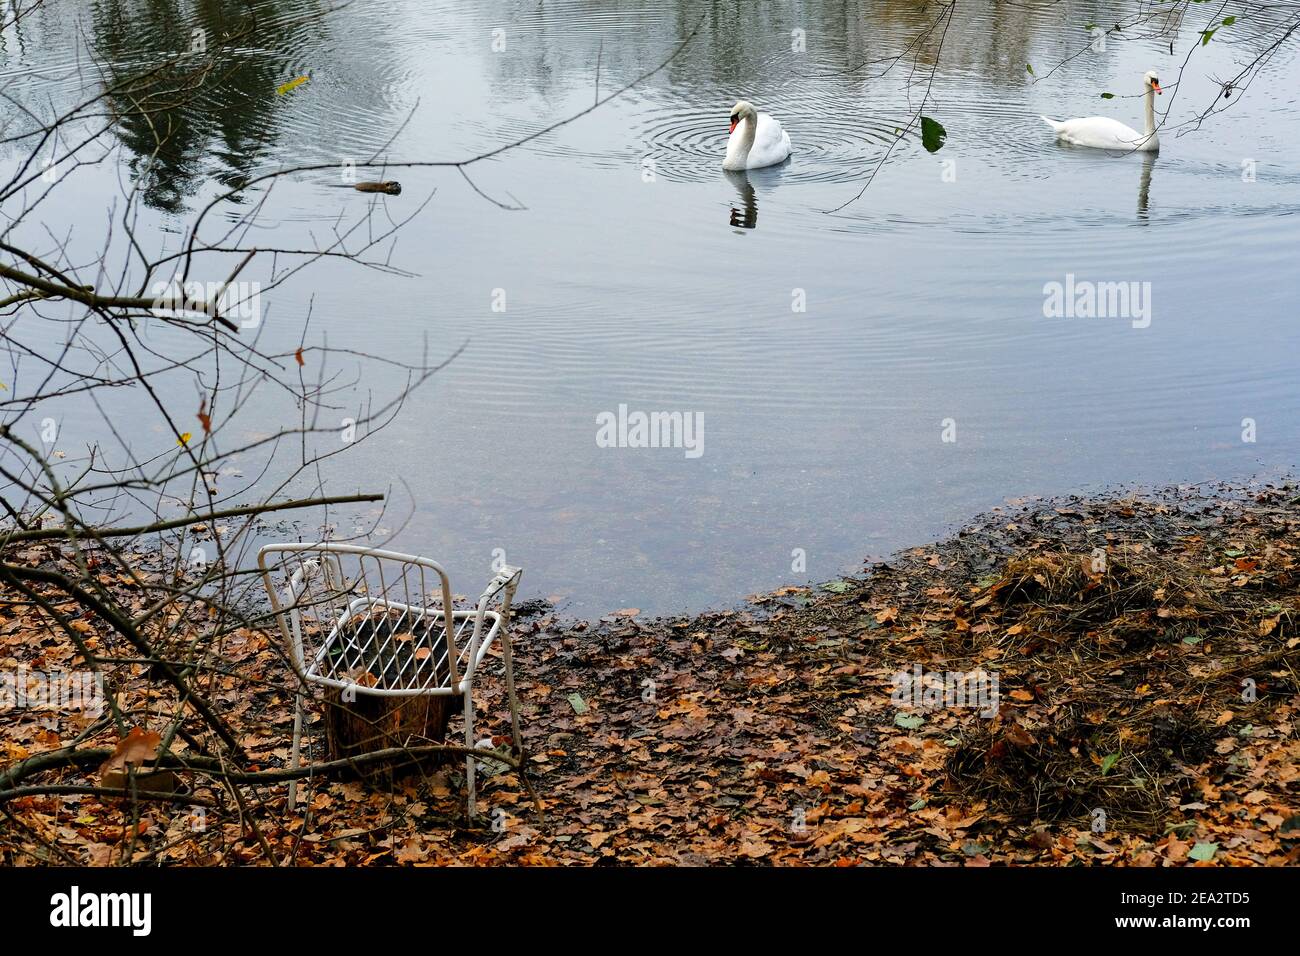 Wedtlenstedt, Germany. 11th Dec, 2020. Swans (Cygnus) and a nutria (Myocastor coypus) swim on a hidden fishing pond, an old lawn chair stands in wilted leaves on the shore. Credit: Stefan Jaitner/dpa/Alamy Live News Stock Photo